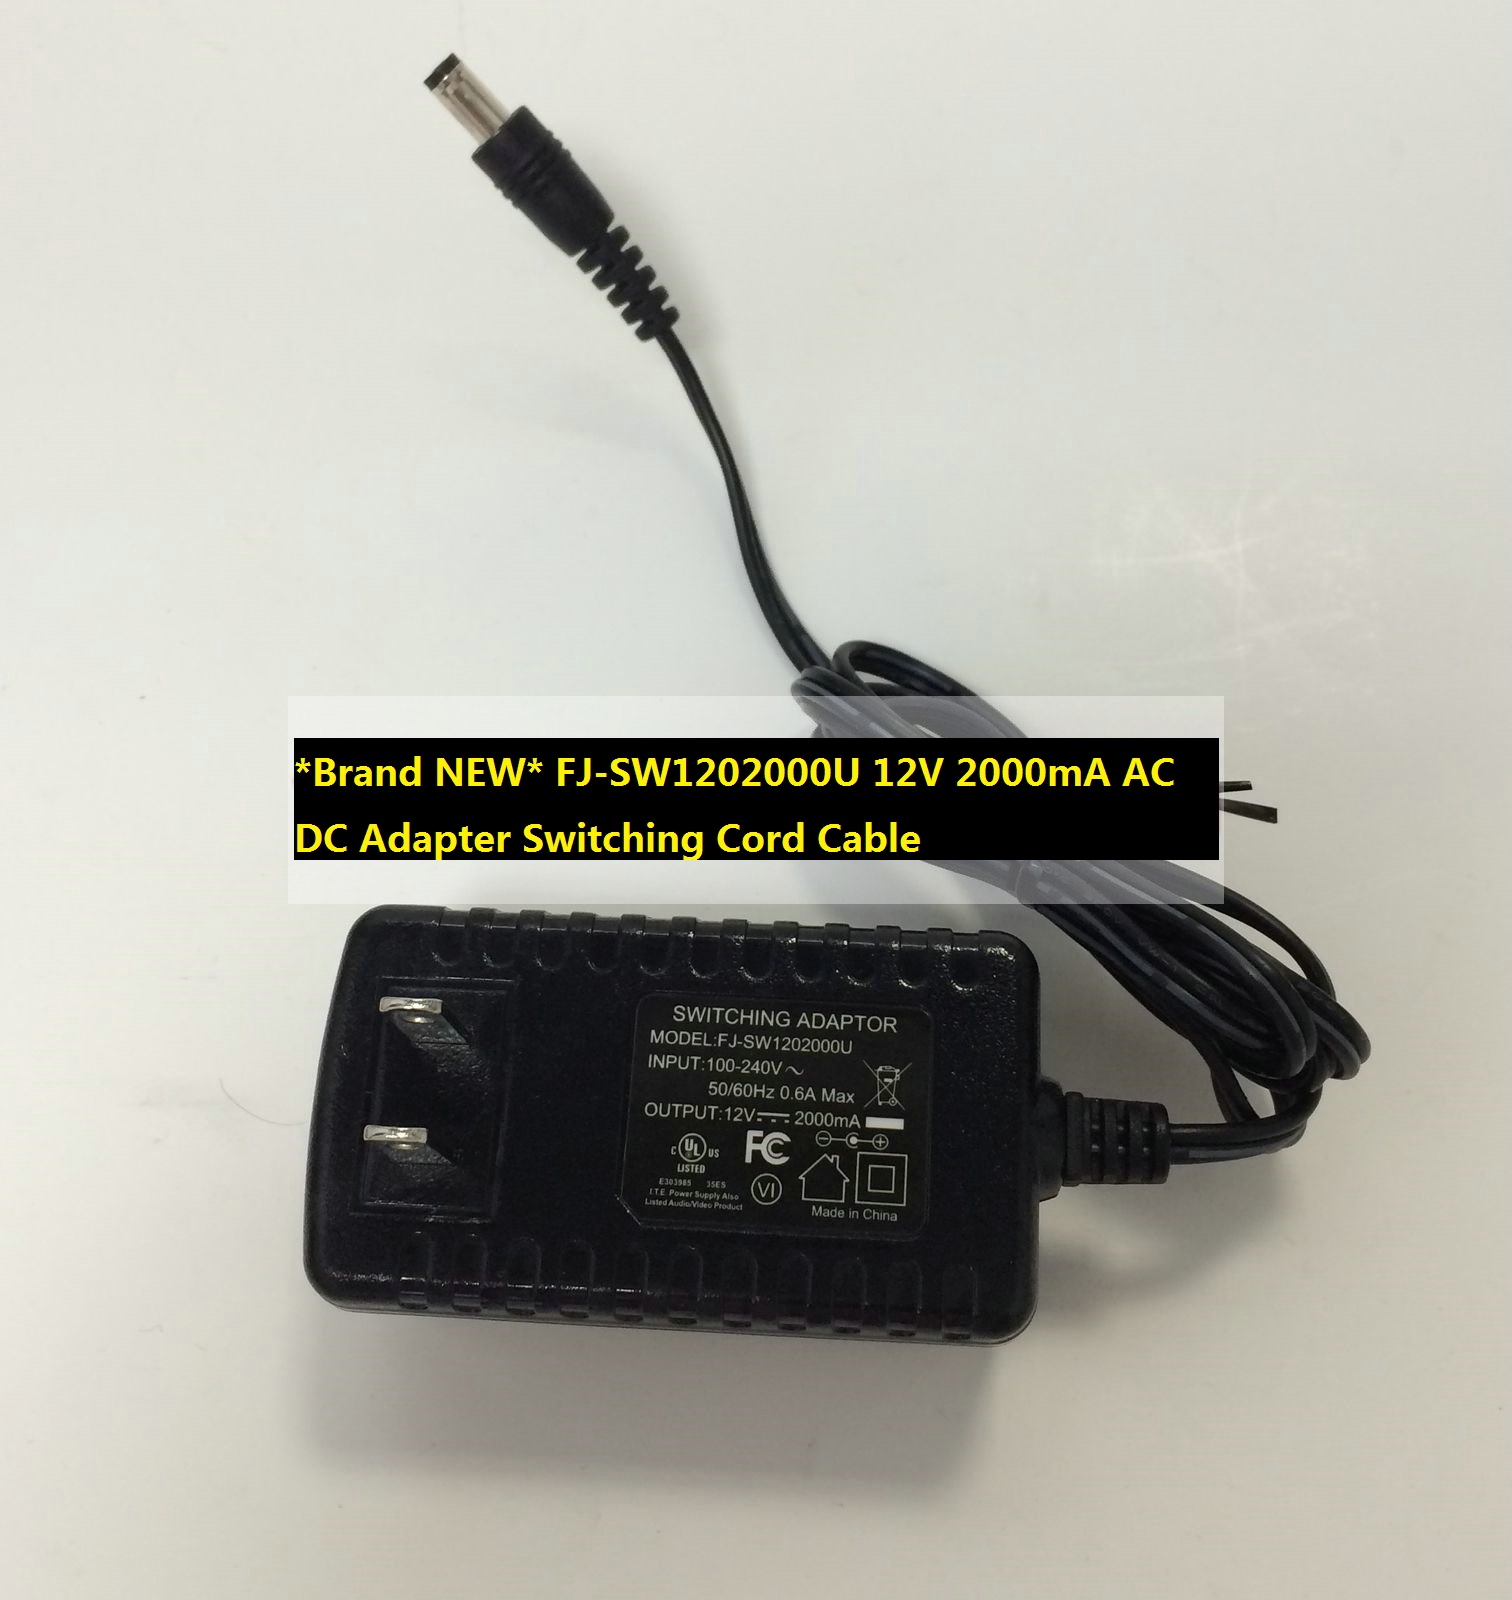 *Brand NEW* FJ-SW1202000U 12V 2000mA AC DC Adapter Switching Cord Cable